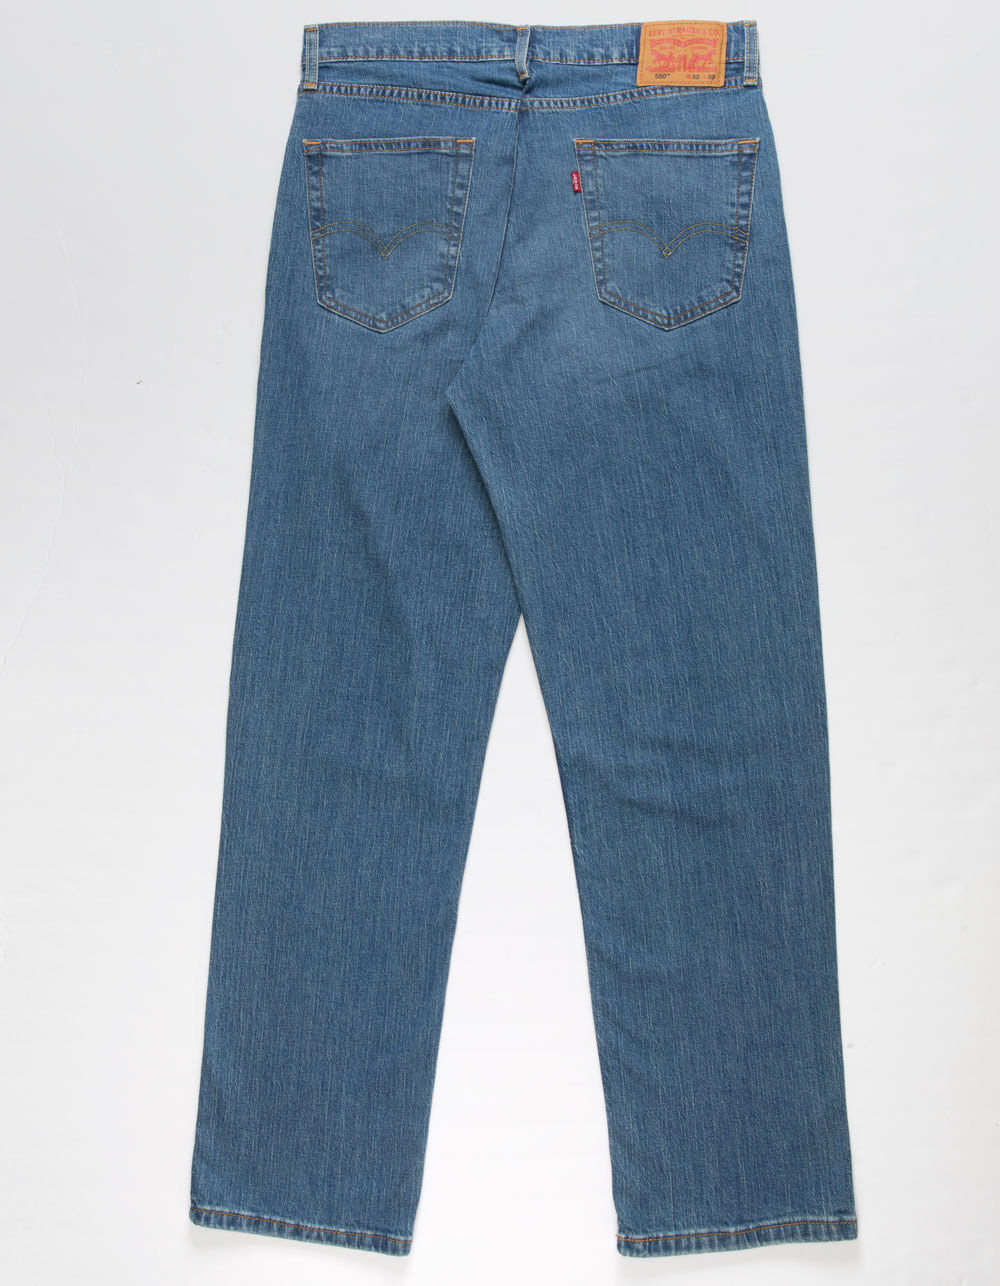 LEVI'S 550 Relaxed Mens Jeans - Fermont Cafe - MEDIUM WASH | Tillys